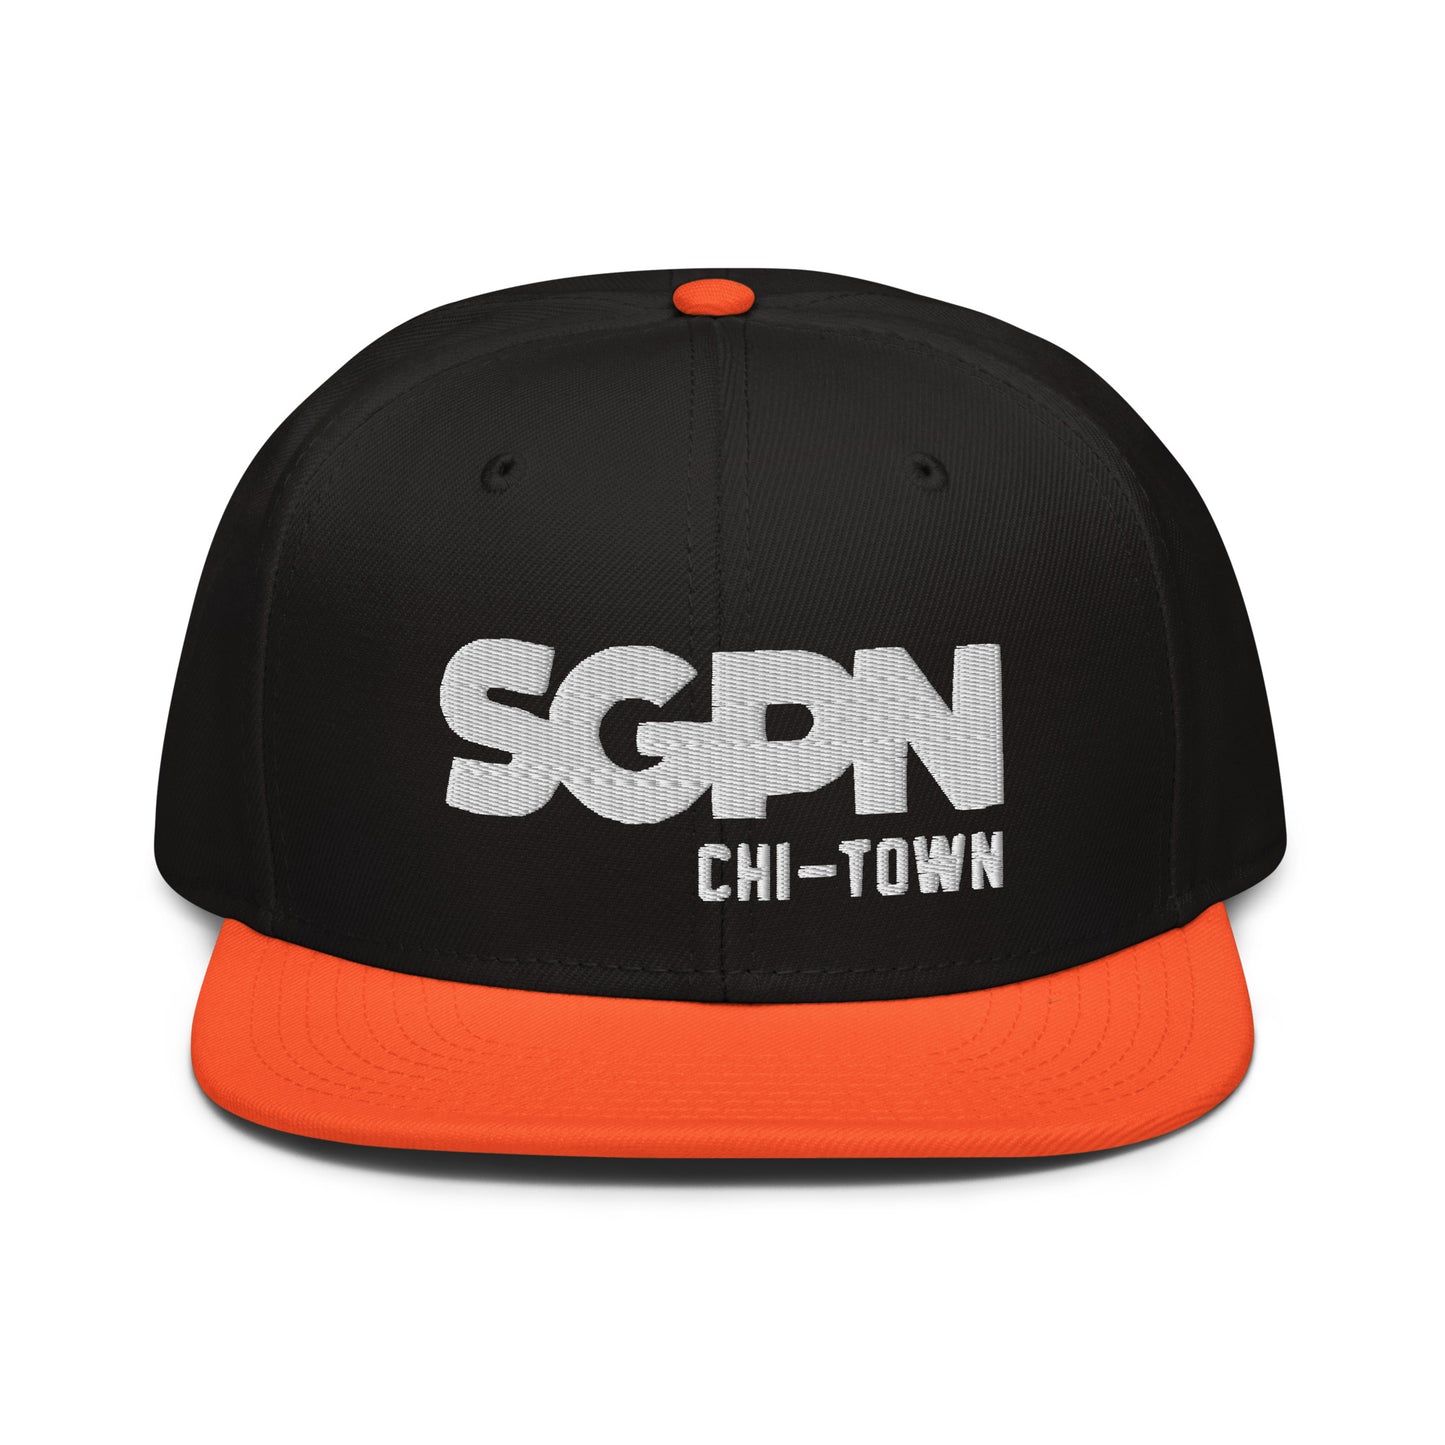 SGPN - Chi-Town edition - Snapback Hat